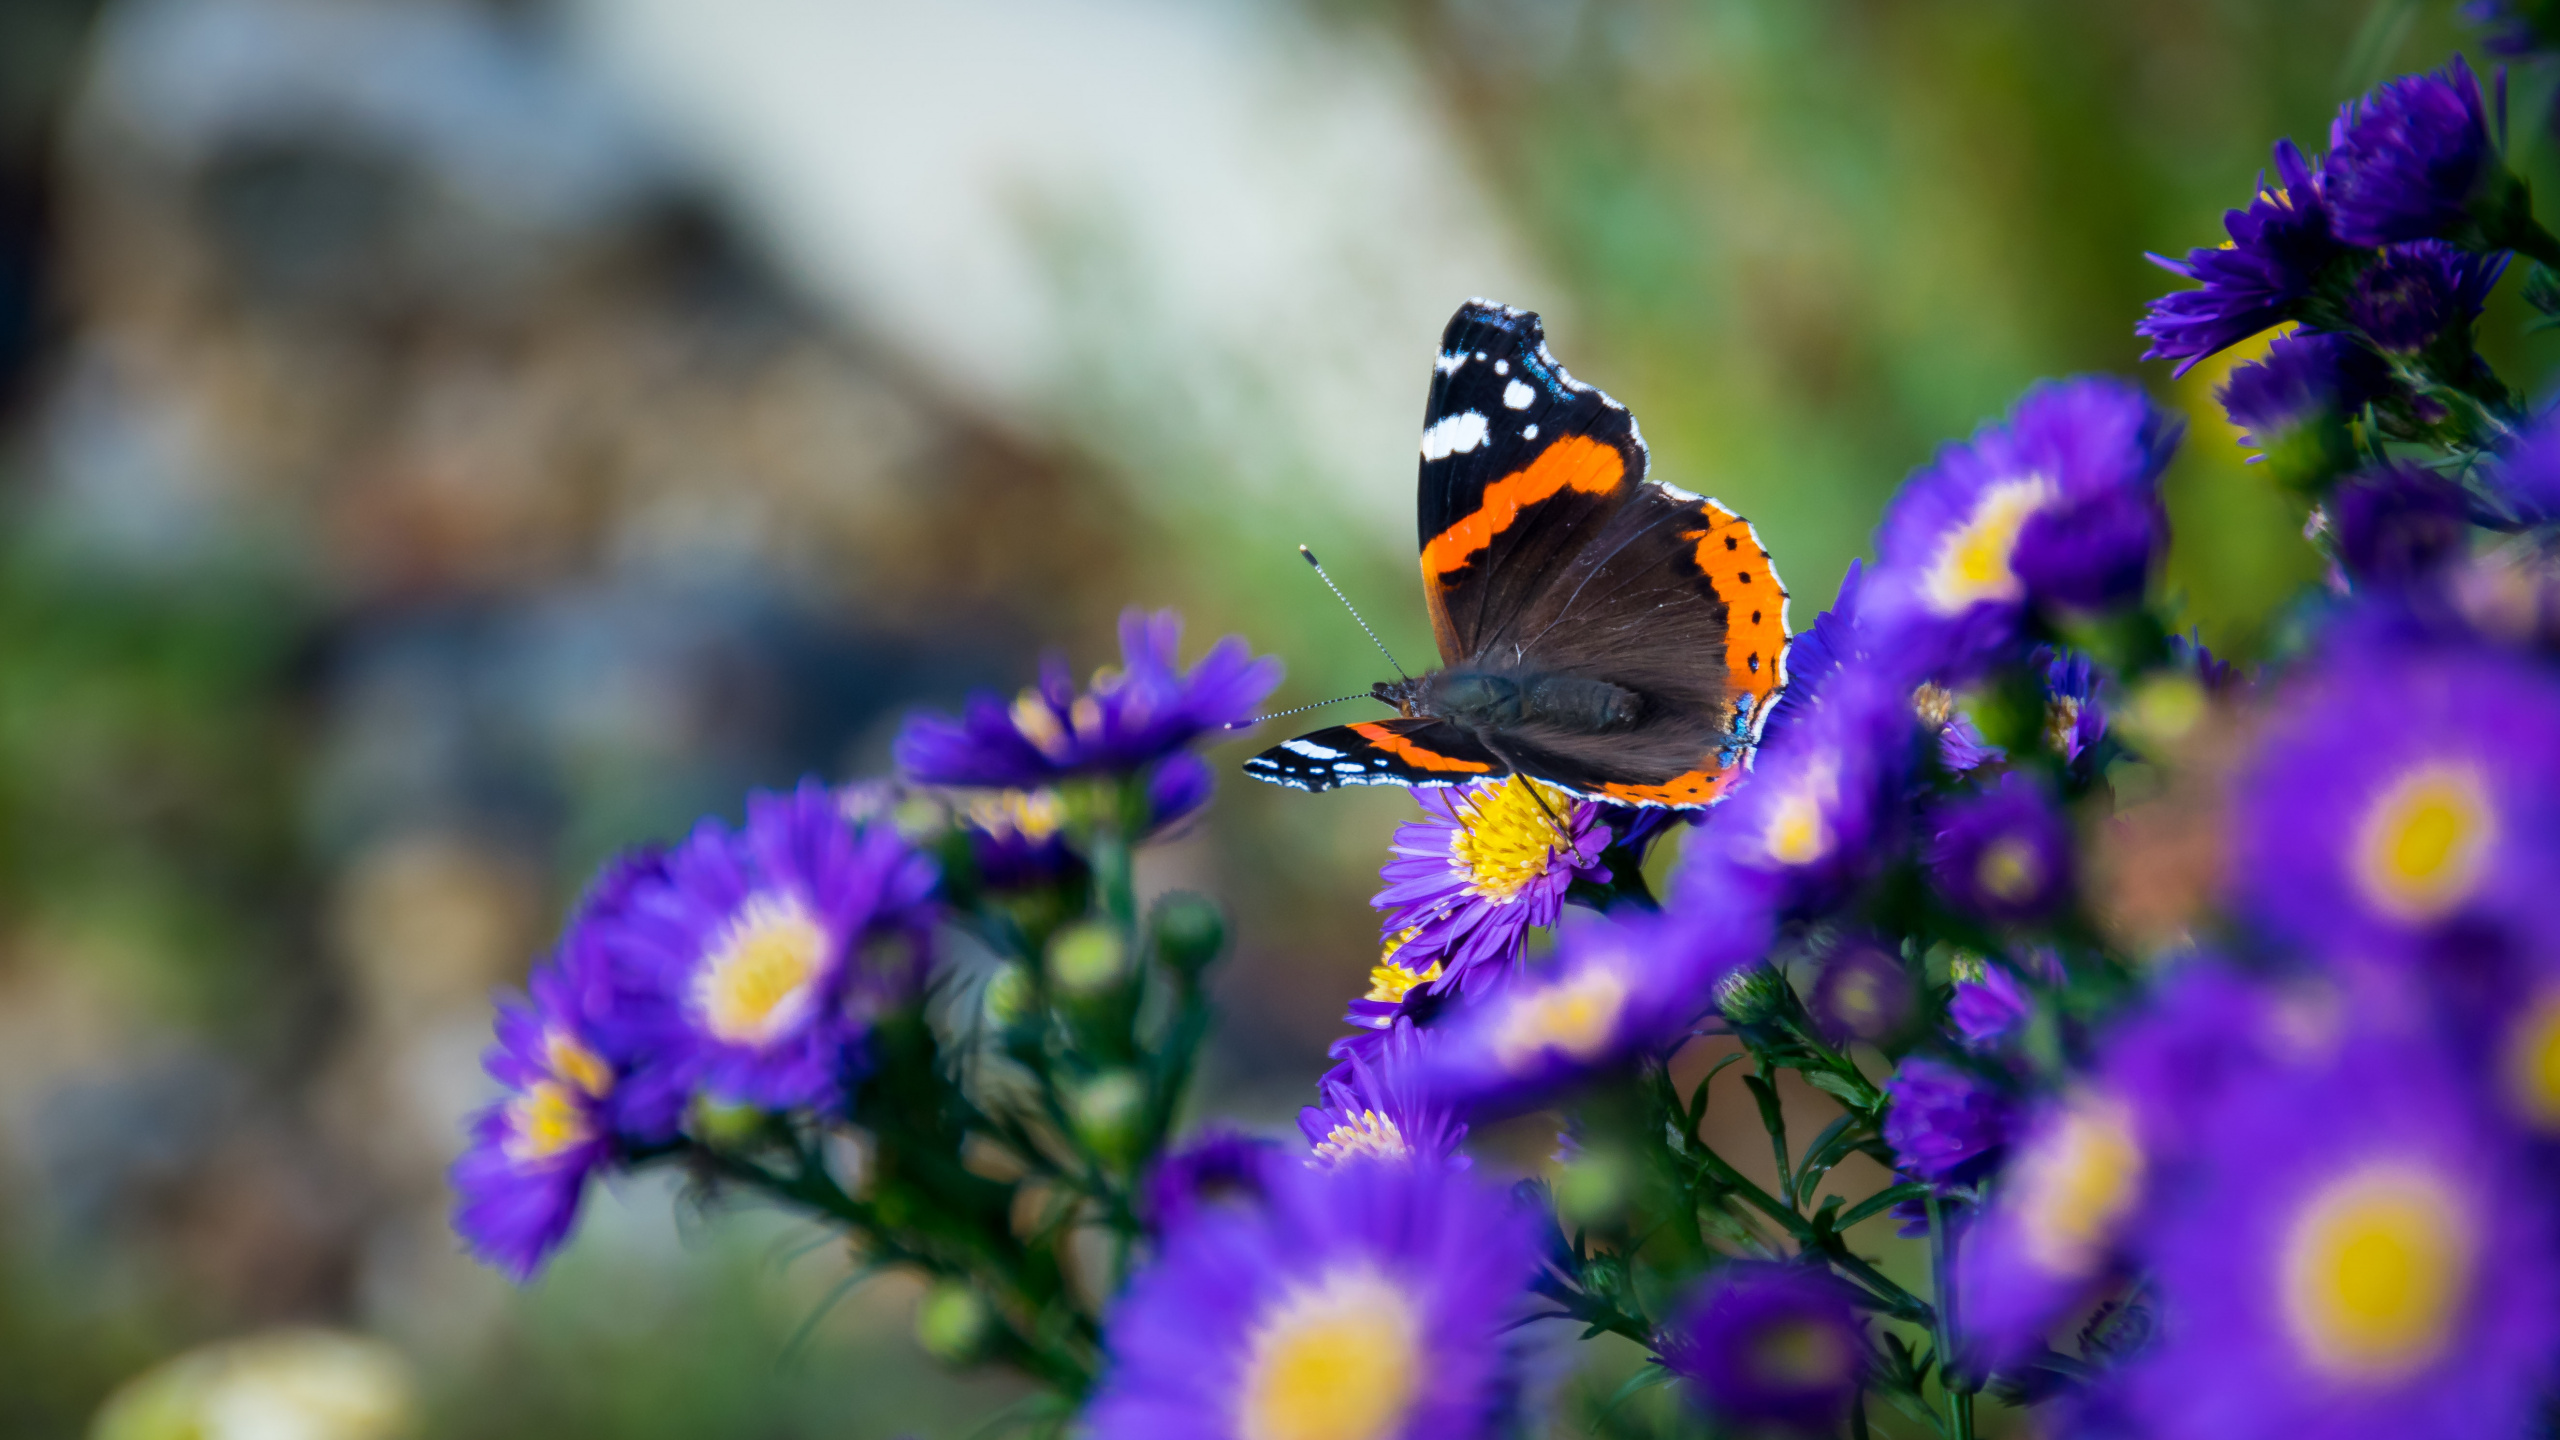 Insect, Flower, Butterfly, Cynthia Subgenus, Moths and Butterflies. Wallpaper in 2560x1440 Resolution